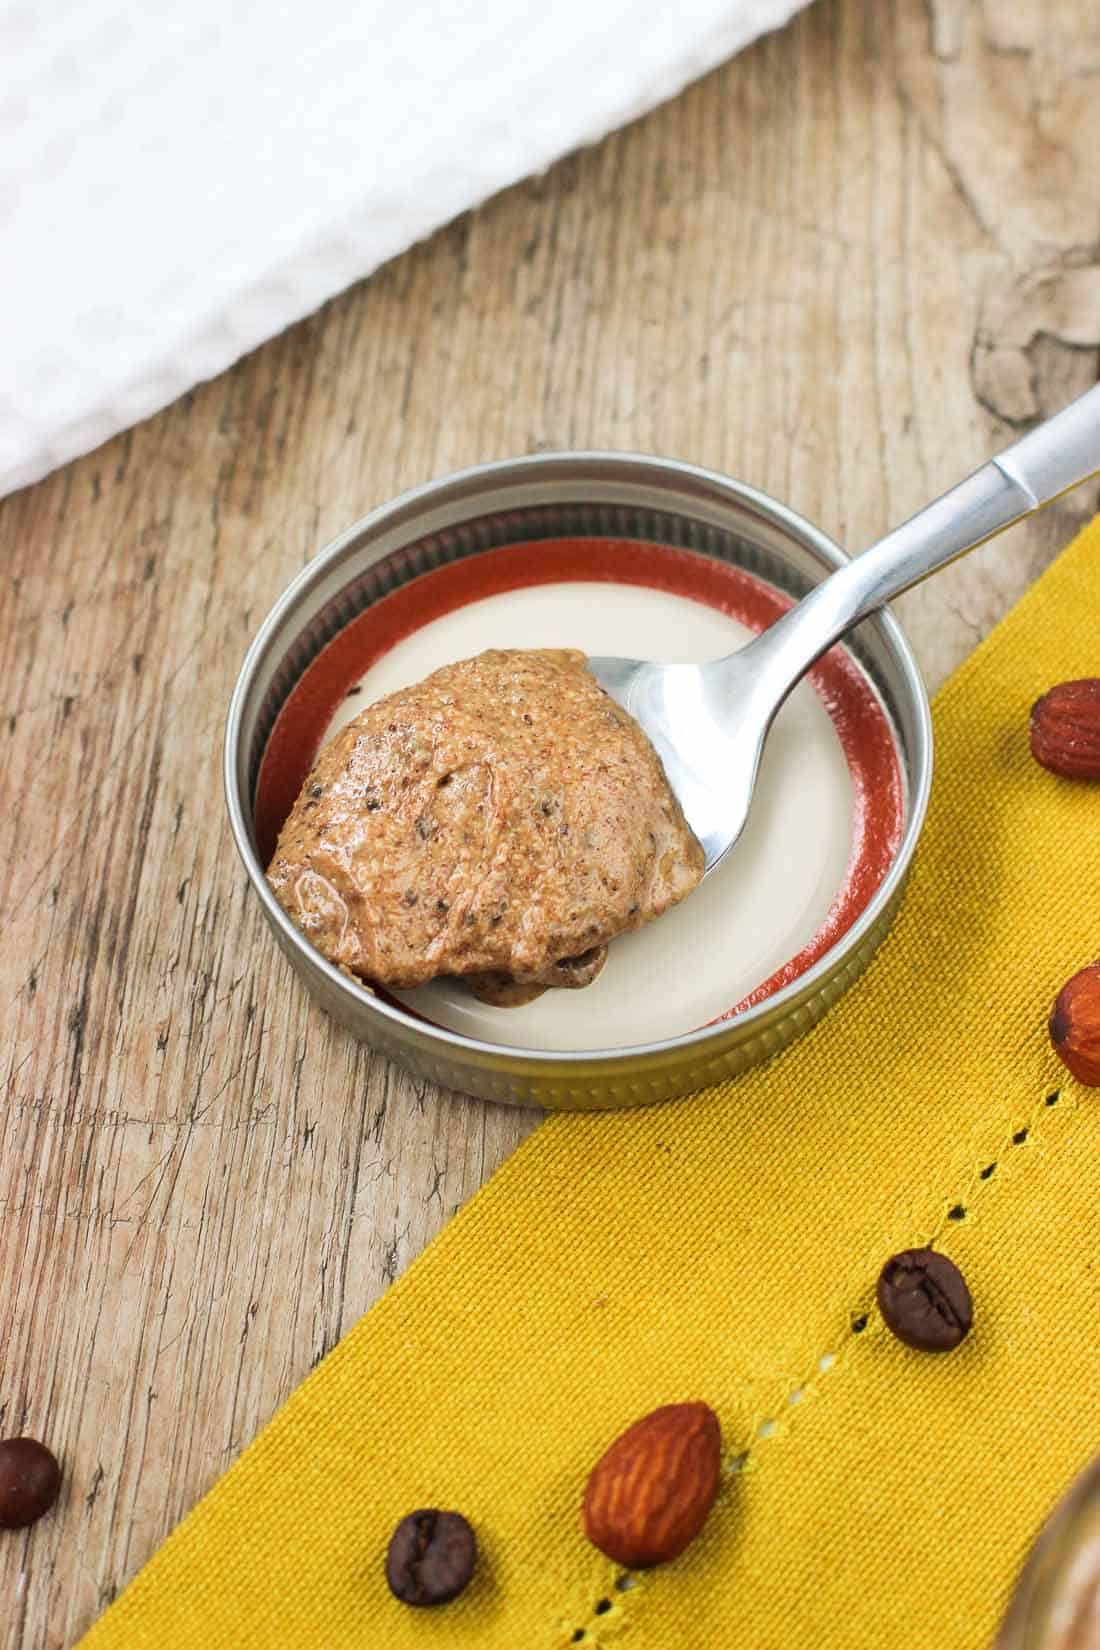 A spoonful of almond butter resting on the lid of the glass jar